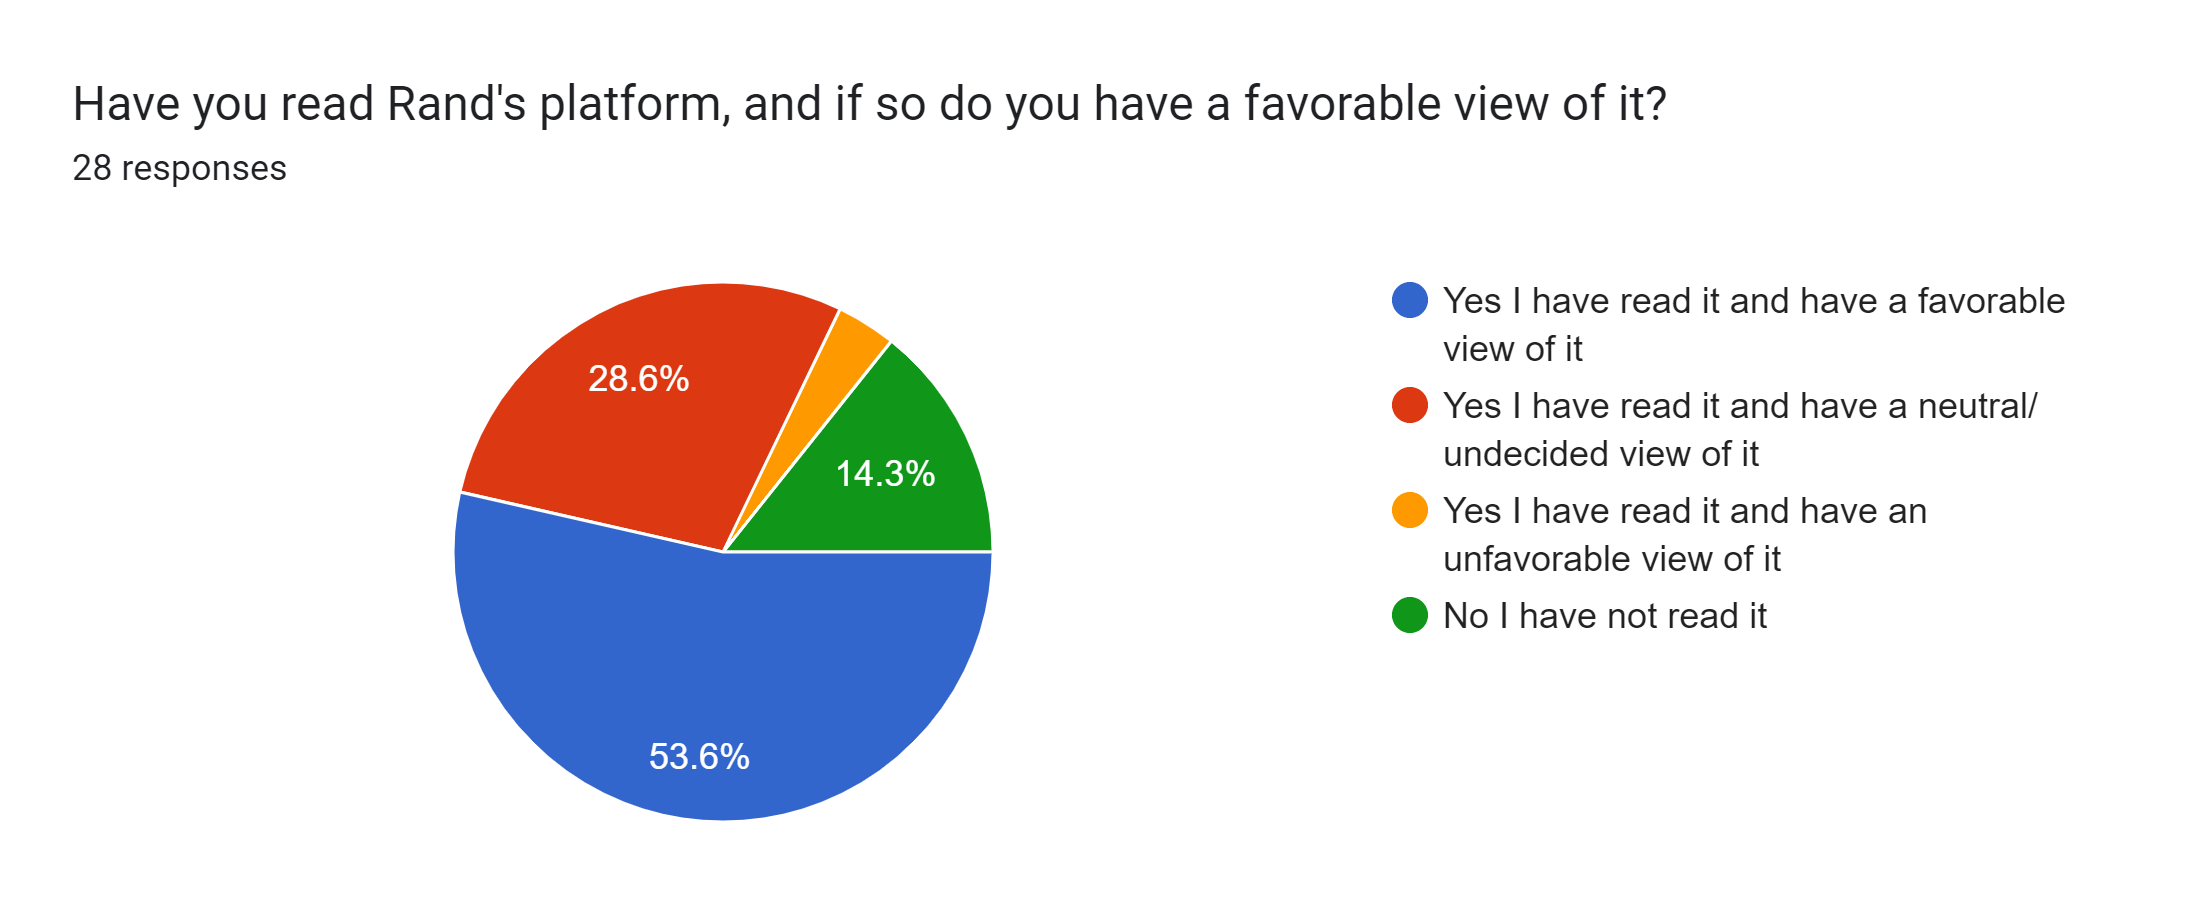 Forms response chart. Question title: Have you read Rand's platform, and if so do you have a favorable view of it?. Number of responses: 28 responses.